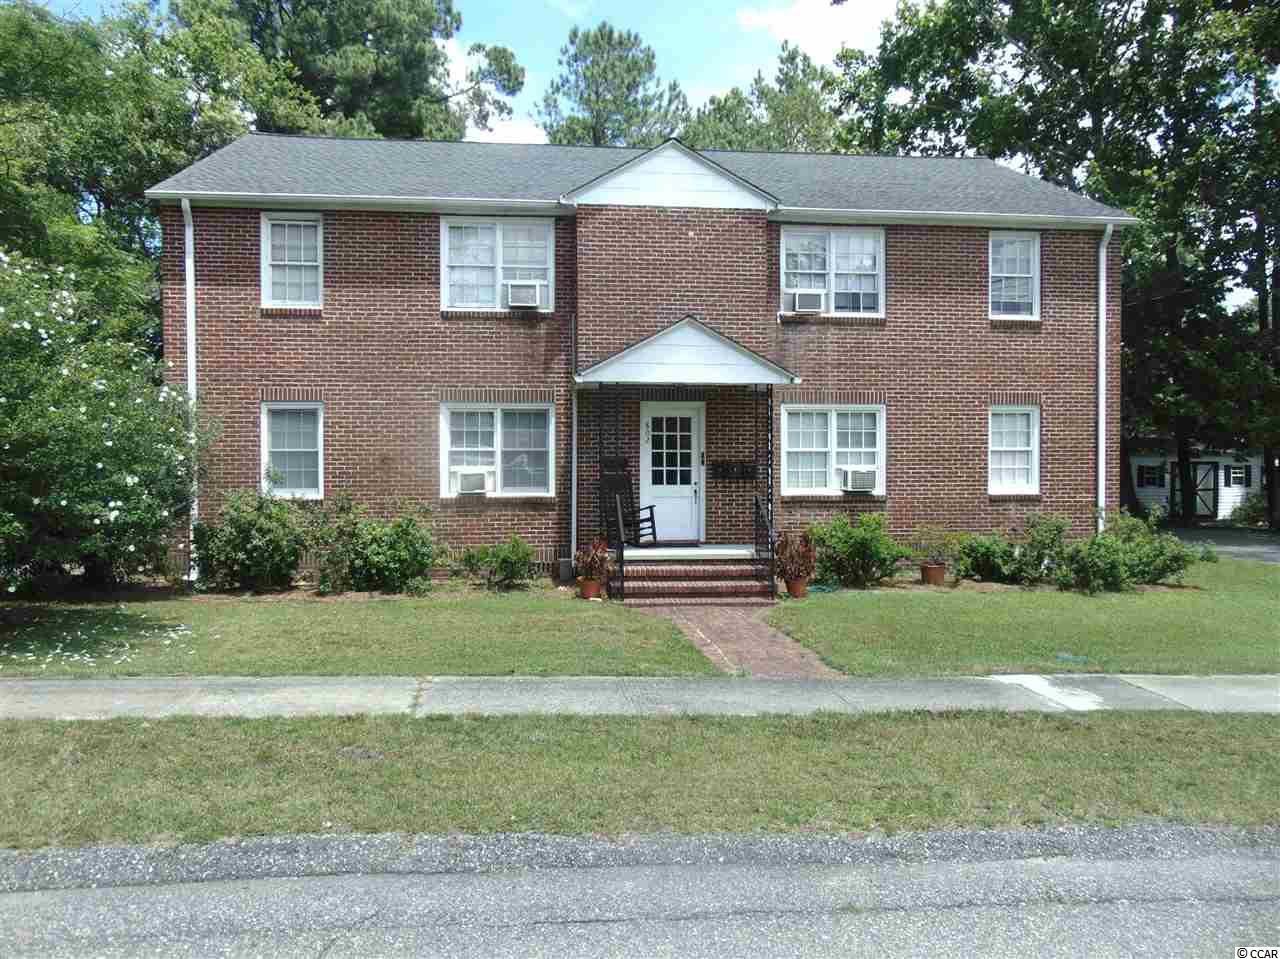 800 & 802 Burroughs St. Conway, SC 29526